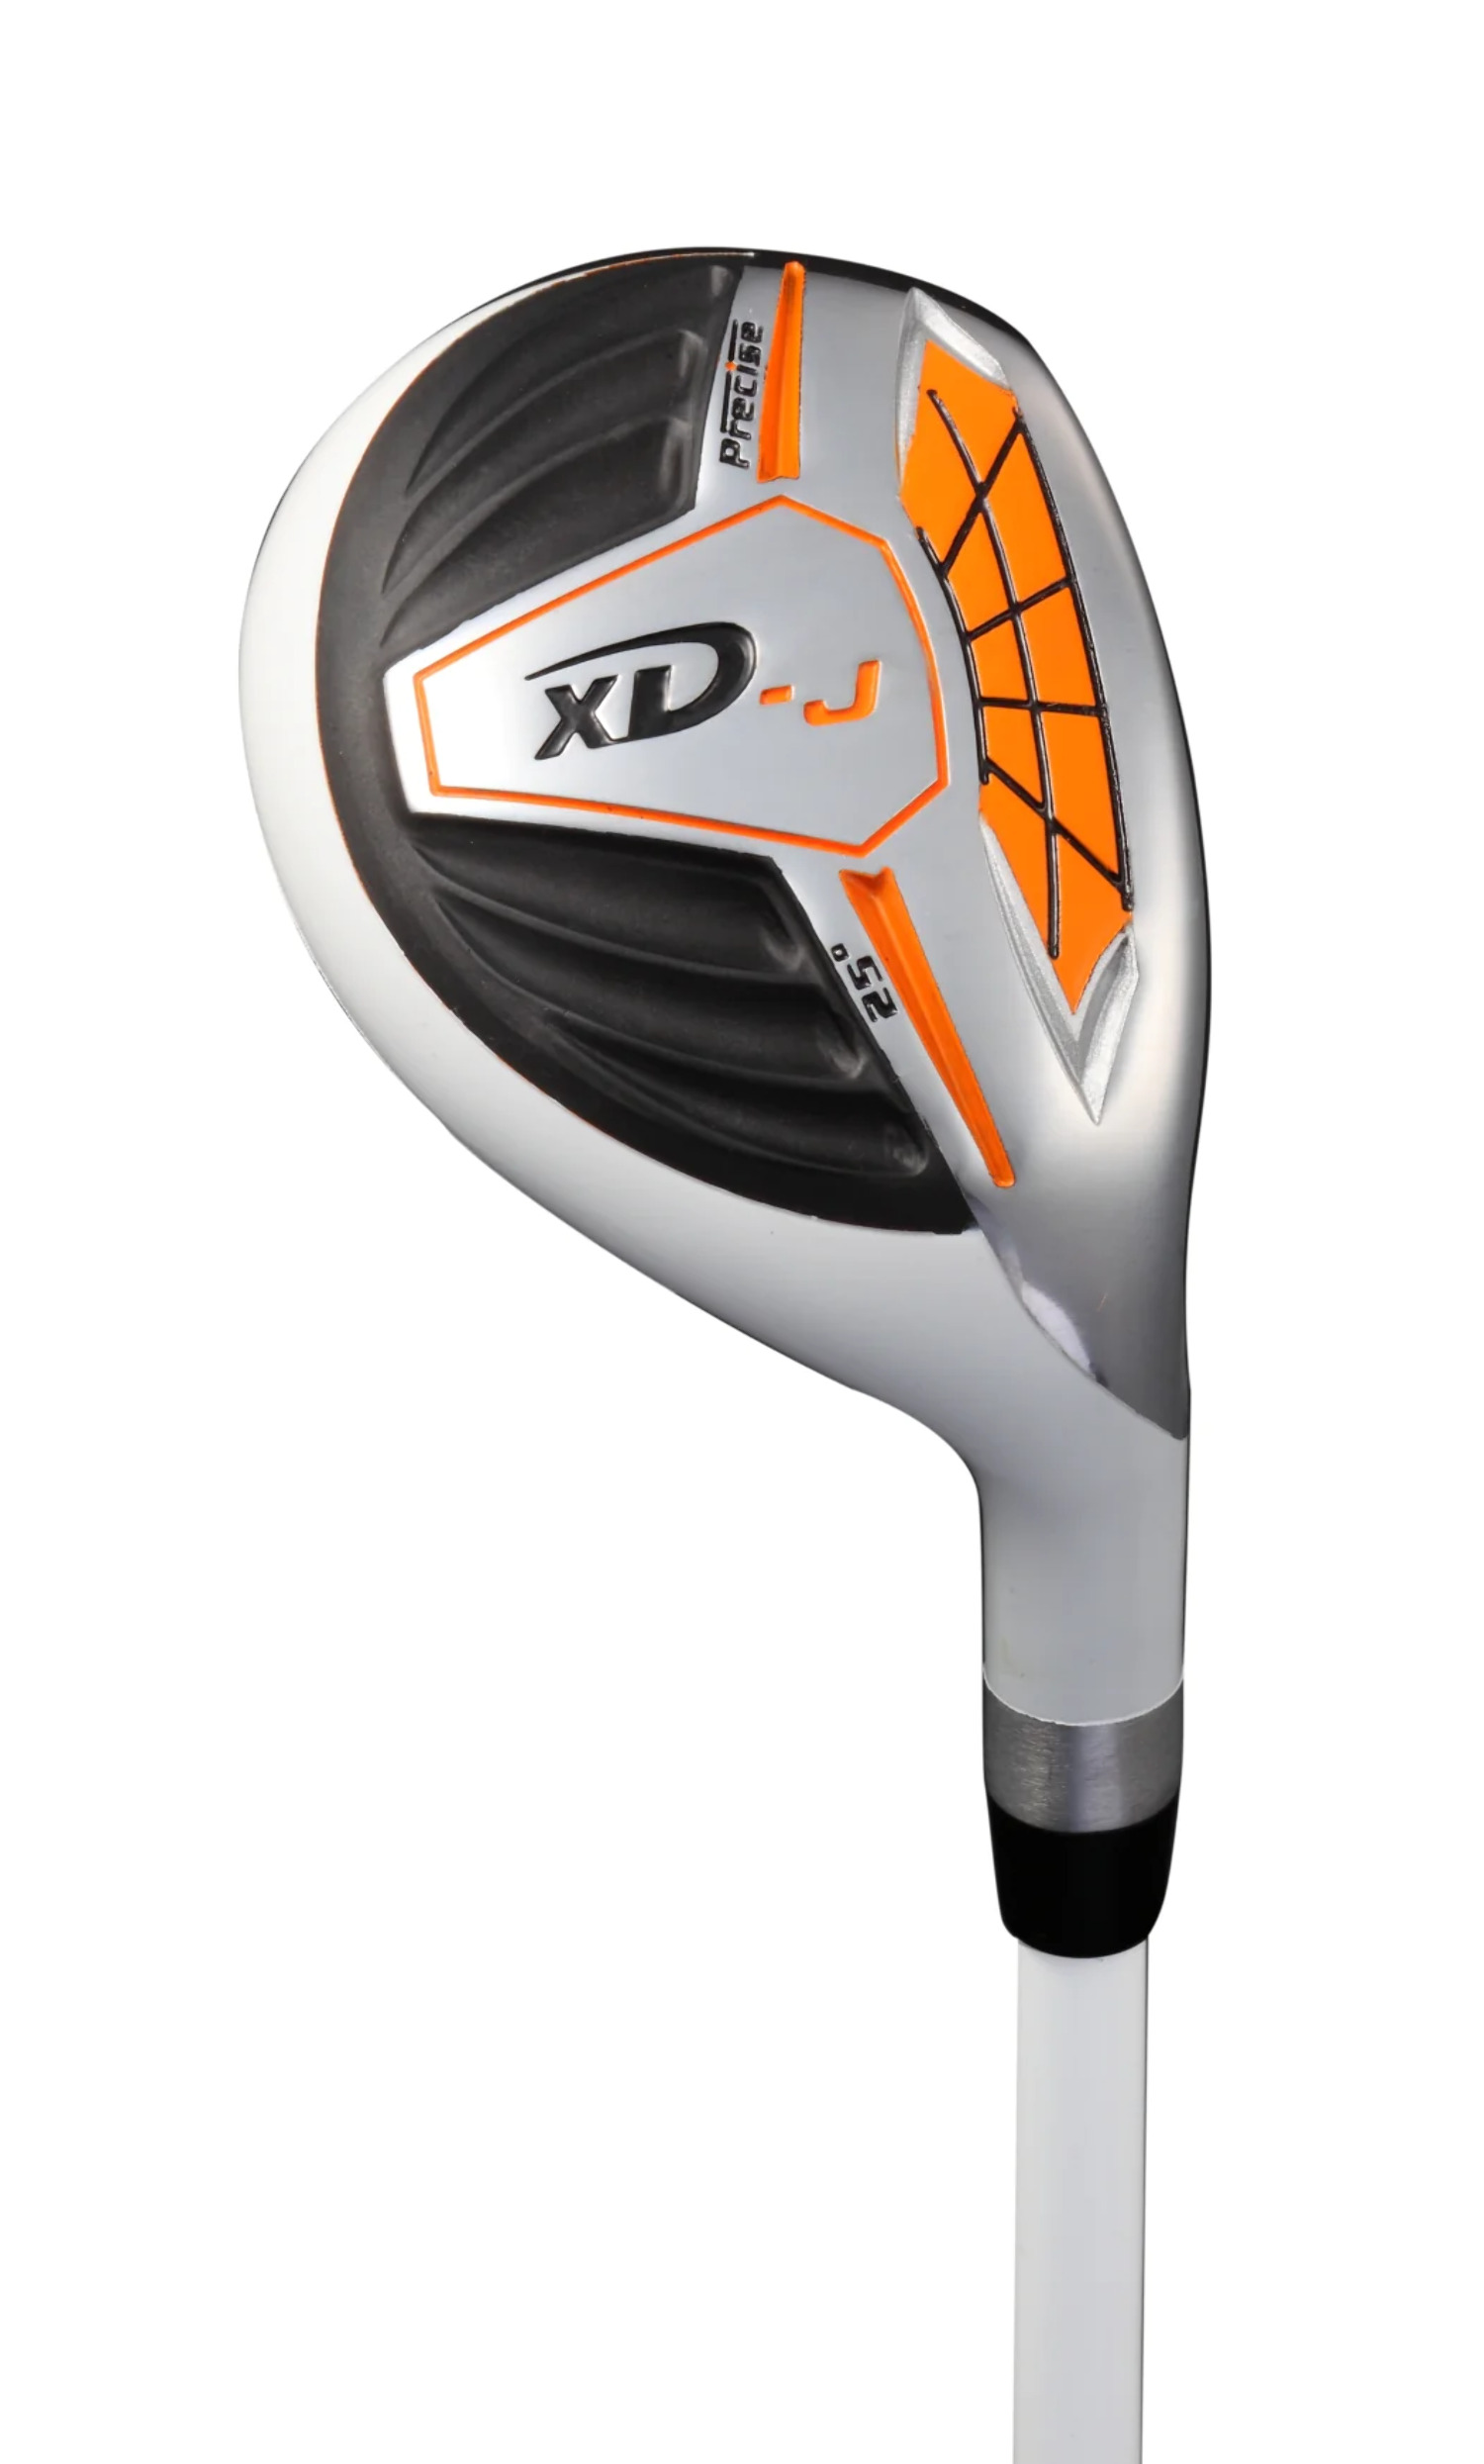 Precise XD-J Junior Complete Golf Club Set for Children Kids - 3 Age Groups Boys & Girls - Right Hand & Left Hand! - image 4 of 11